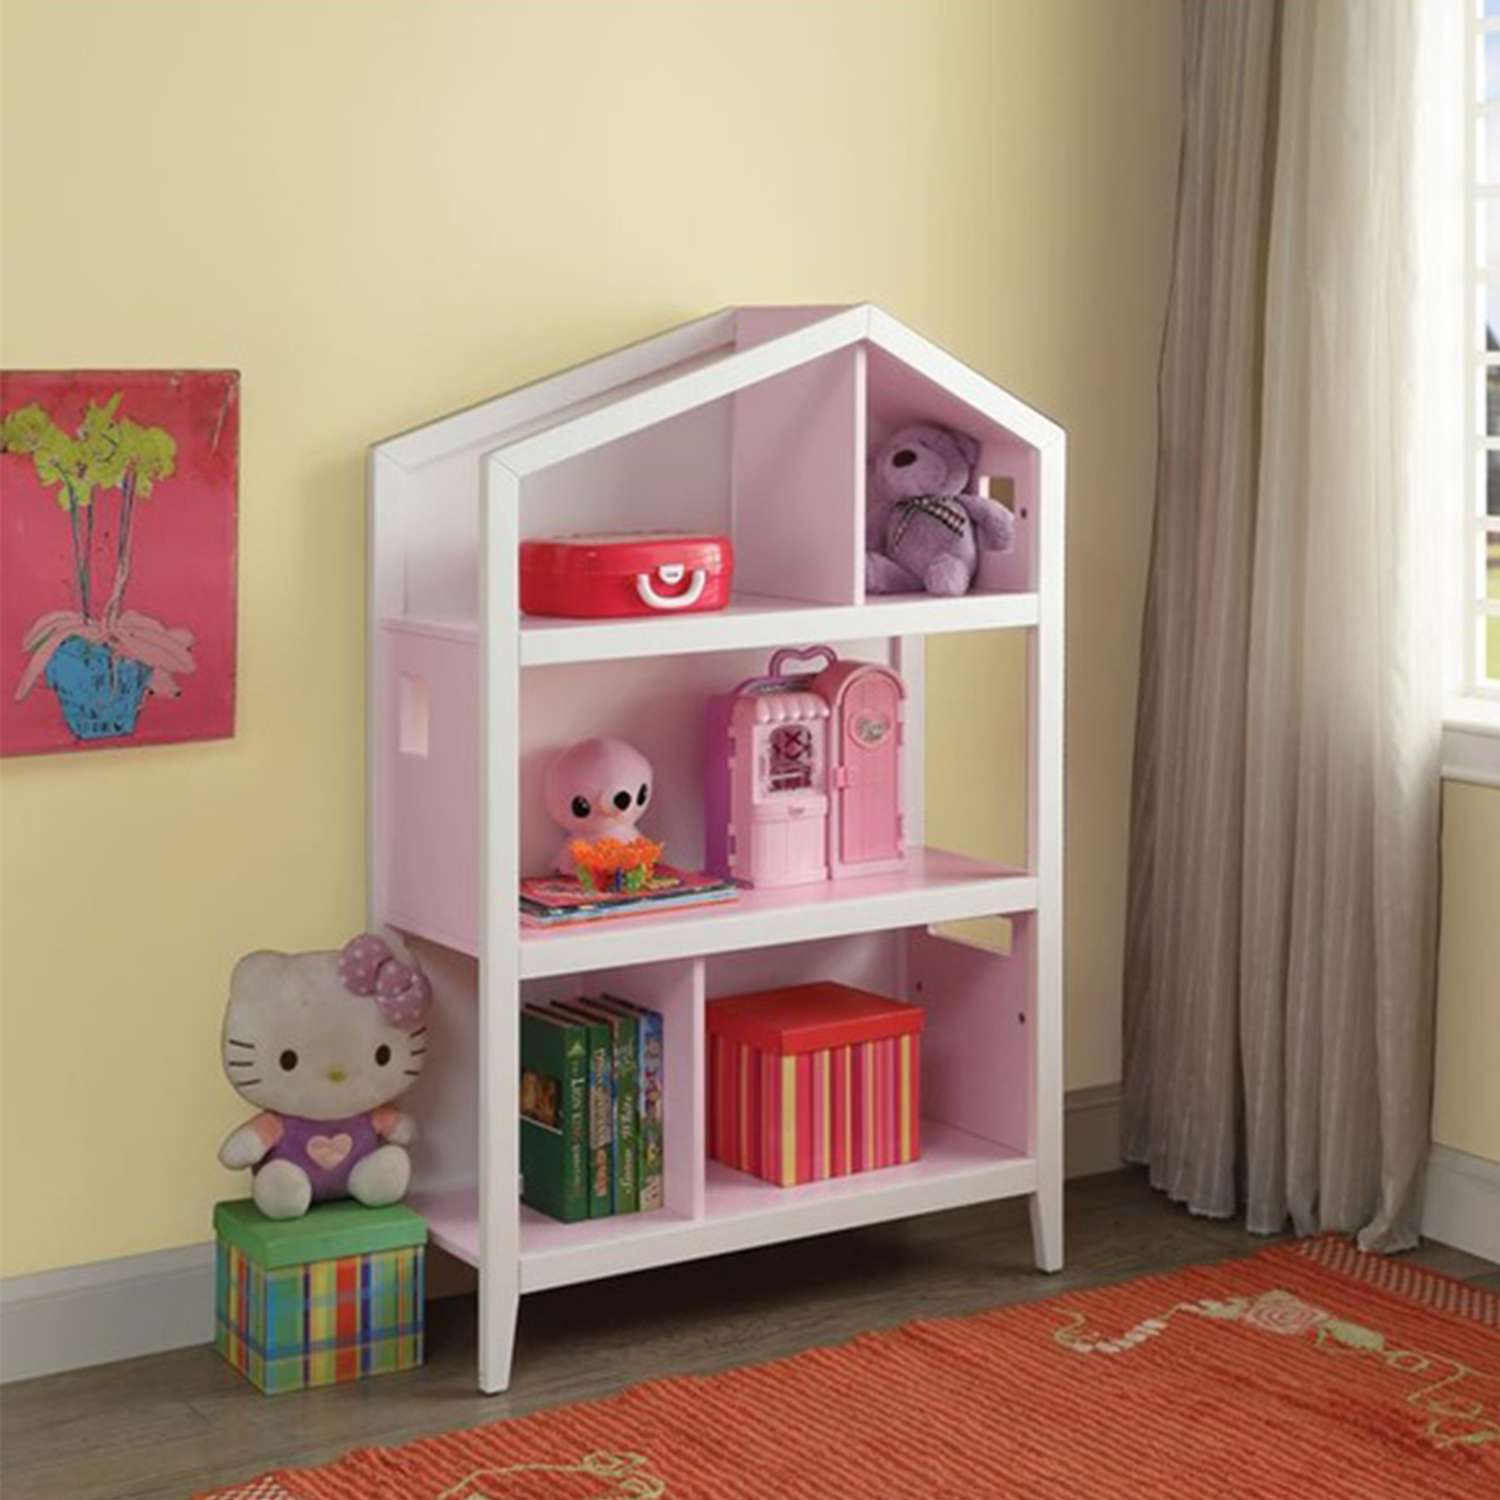 14" X 33" X 50" White Pink Wood Bookcase